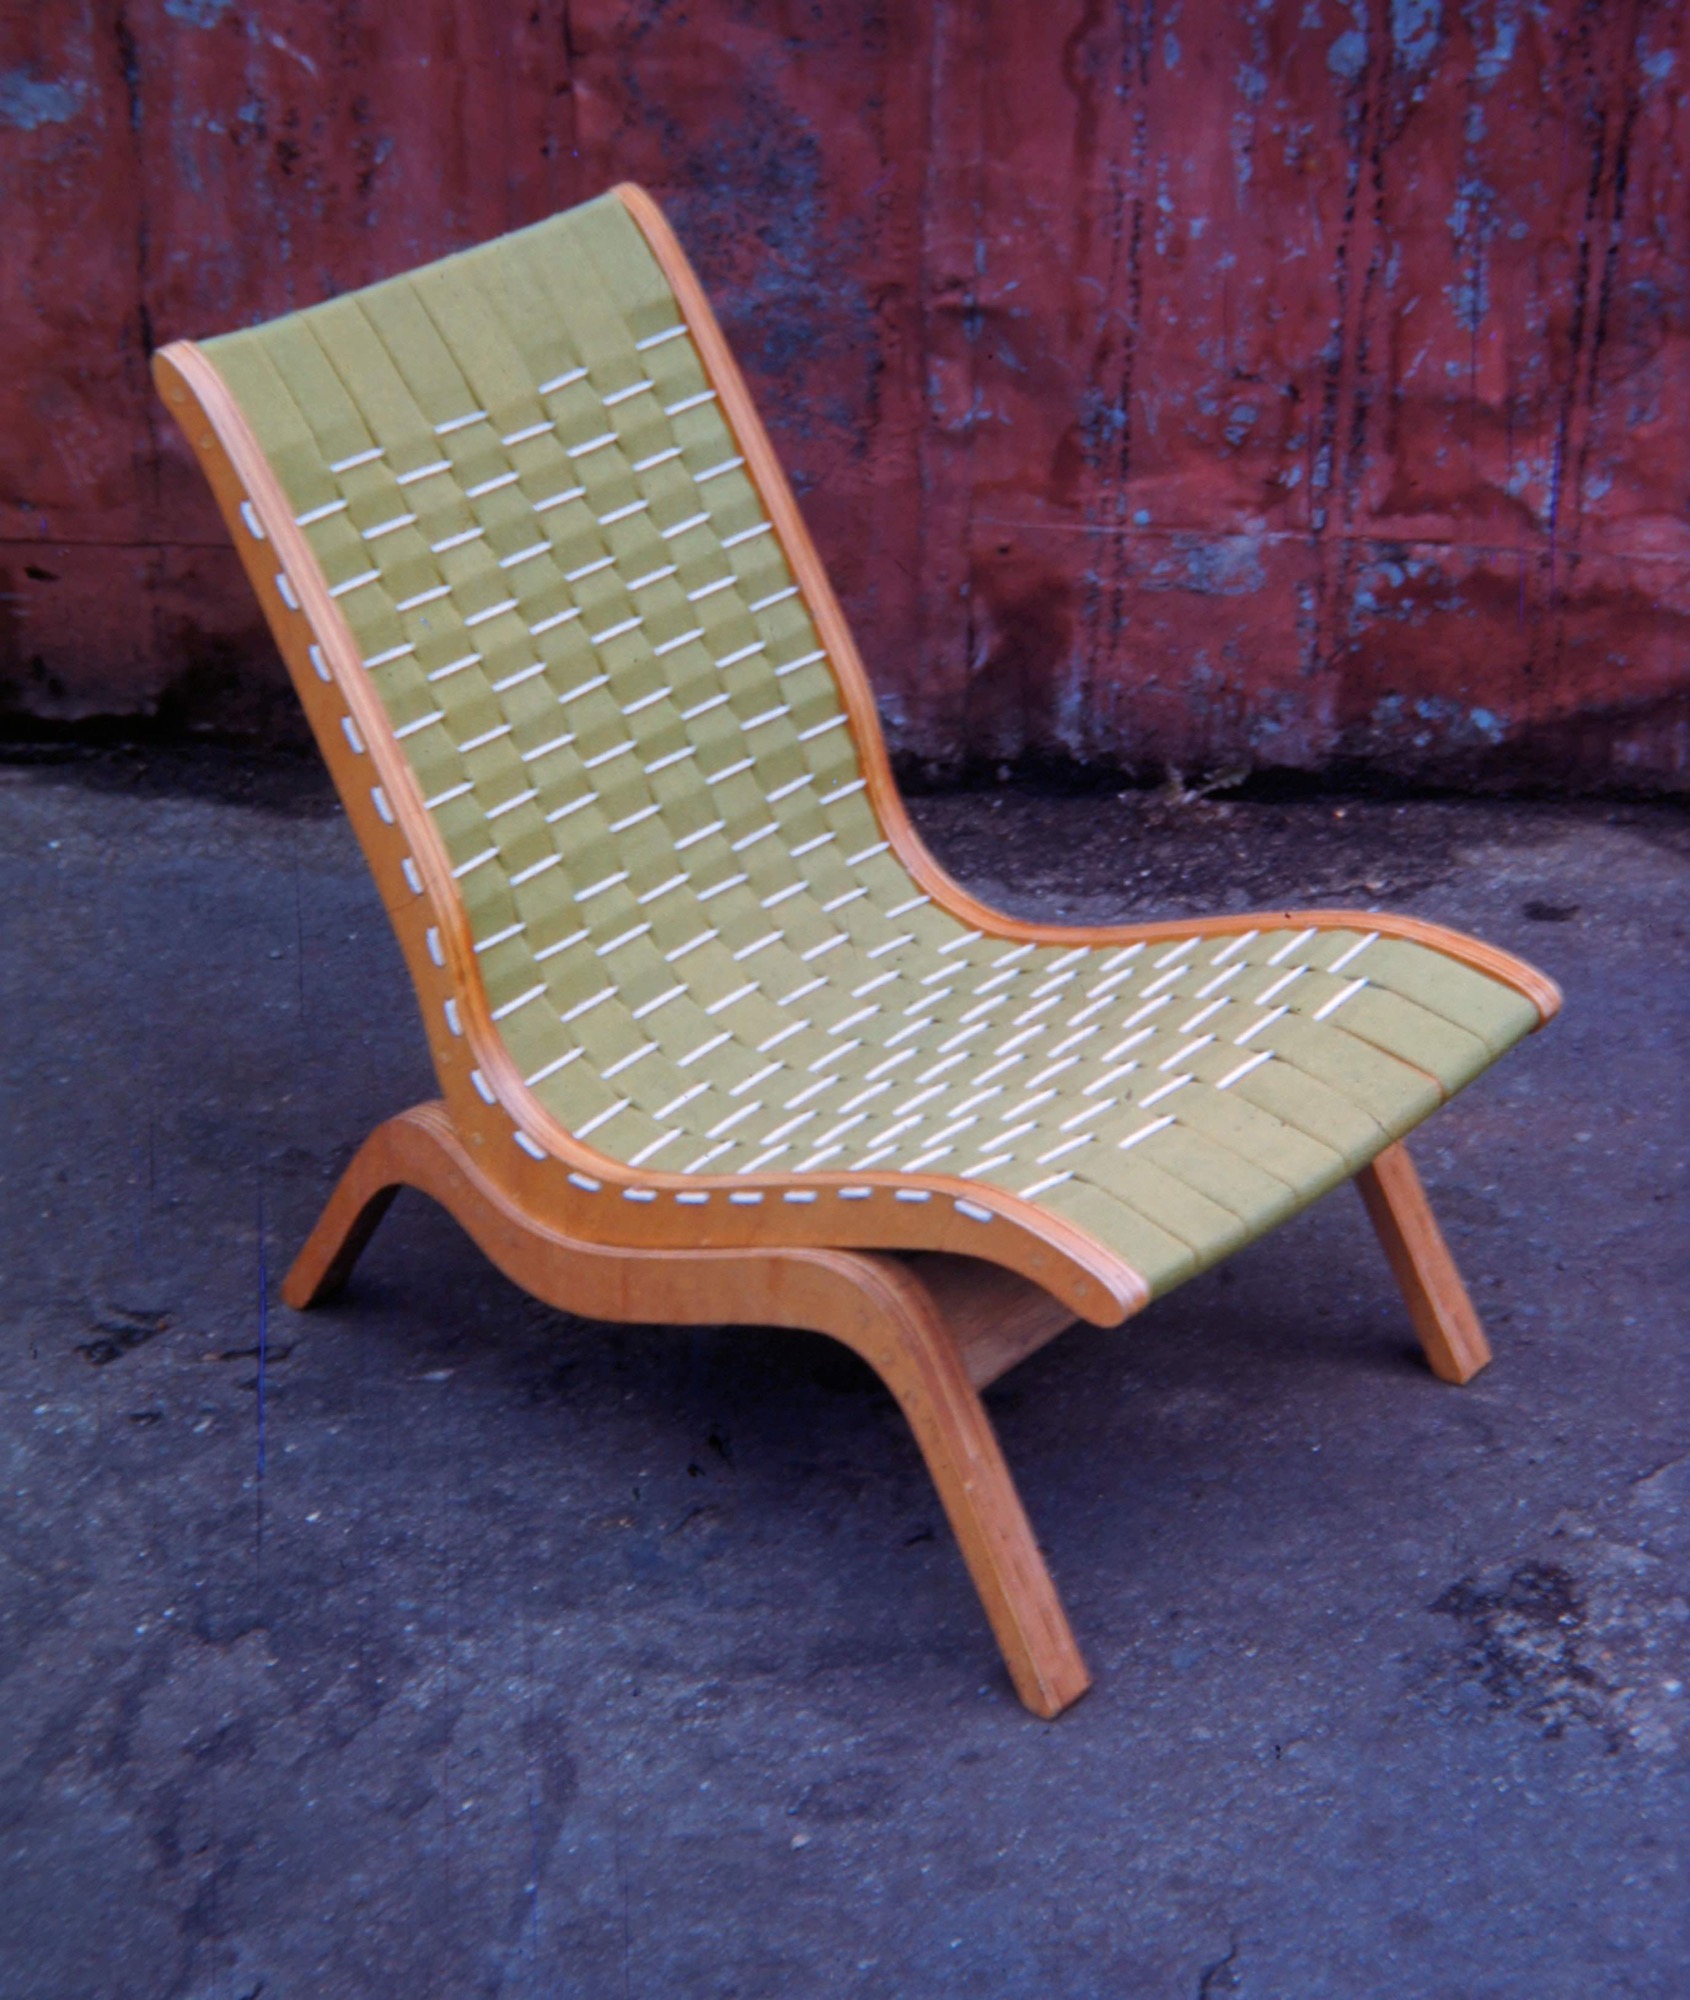 Relaxation Chair 1950-51. Featherston Archive, National Gallery of Victoria